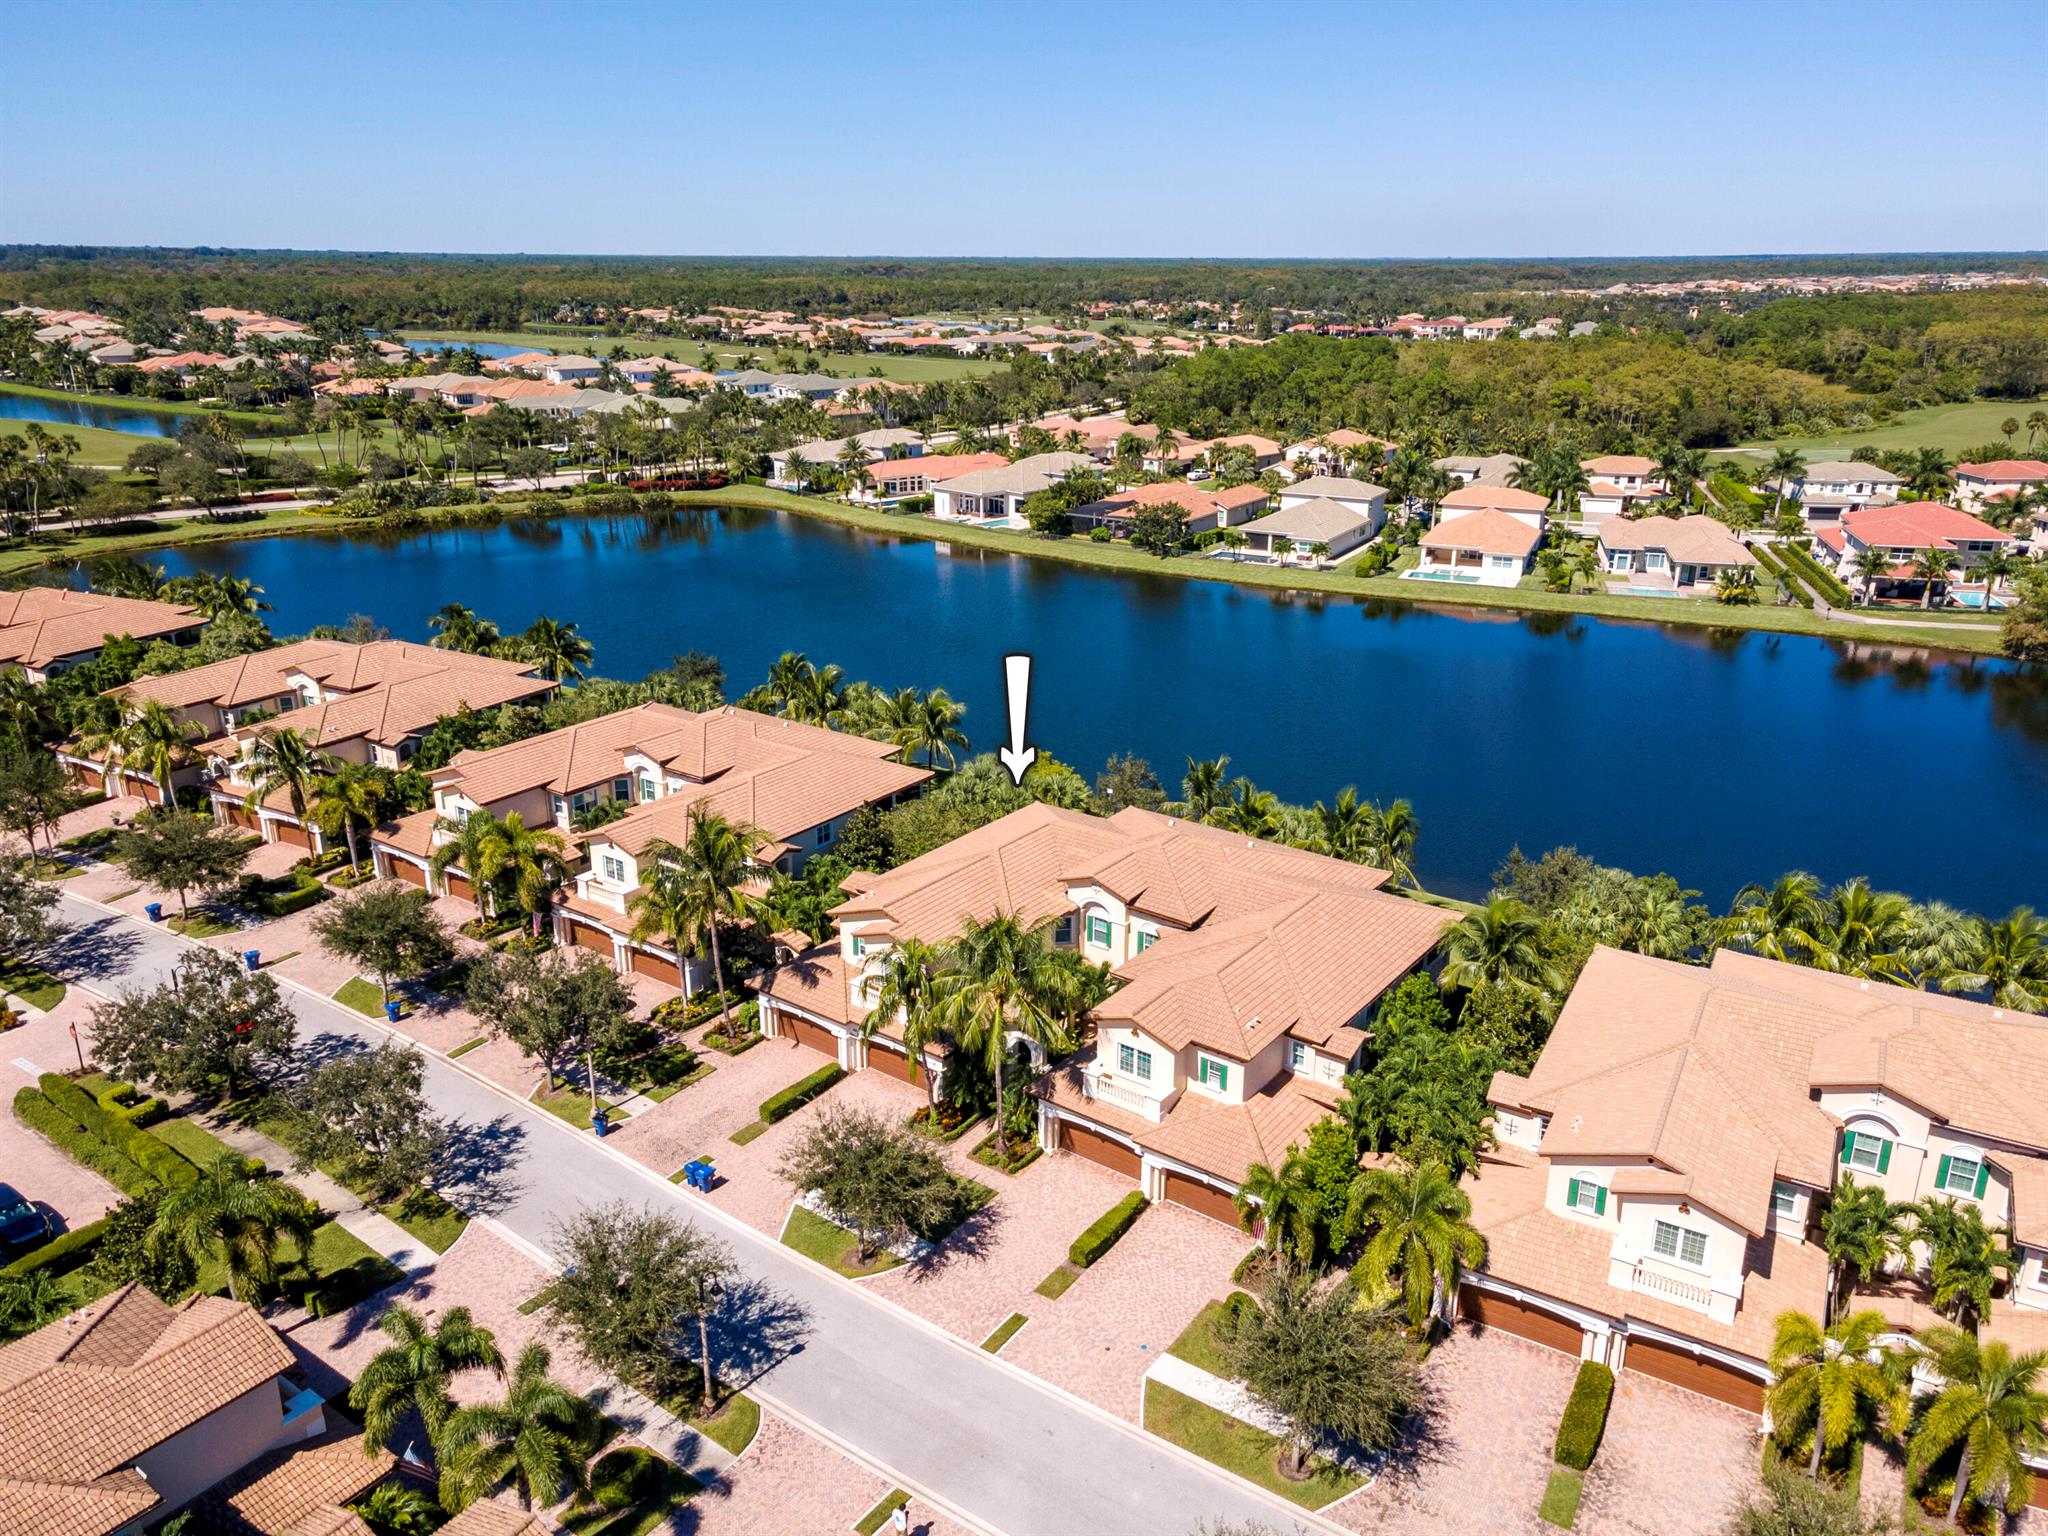 Breathtaking lake views from this prime waterfront location can be yours from this sought-after Genova model in the resort-style gated community of Jupiter Country Club. With nearly 2,700 sf of living area, this light-filled 3 bedroom, 3 bath PLUS den, 2 car garage carriage home lives like a single family home with the benefits of maintenance-free living. This well-designed floor plan offers open concept living with the living room adjacent to the kitchen & dining room. The kitchen is the heart of the home and features solid wood white cabinetry, beautiful granite countertops & a center island with stylish pendant lighting. The primary bedroom is spacious with a private door leading to the balcony, a large walk-in closet & a spa-like bath with a large soaking tub, dual vanities, and walk- in shower with frameless glass enclosure. Both guest bedrooms are ample in size - one guest room has an ensuite bath. The flex space/den is perfect as an office or TV room. The private electromechanical elevator was installed in 2016. Sip morning coffee or dine alfresco from the oversized screen-enclosed covered balcony with tranquil views of the wide lake and tropical landscaping. Live comfortably in this energy efficient home with CBS construction, impact glass and natural gas. Jupiter Country Club offers a luxury lifestyle with world-class amenities. It is a private gated community conveniently located within close proximity of I-95 and the FL Turnpike, beaches, shopping, restaurants, parks &amp; nature preserves. Club amenities include a Greg Norman designed golf course, 2 resort-style pools, the newly remodeled Sway restaurant, a state-of-the-art fitness center + group fitness studios (yoga, mat pilates, barre, spin &amp; more), tennis, pickle ball, bocce ball &amp; basketball. Jupiter Country Club is located in the highly desired Northern Palm Beach County and is the perfect location to easily access the surrounding cities of Orlando, West Palm Beach and Miami which provide a wealth of activities, culture and amenities. Live your best life here!